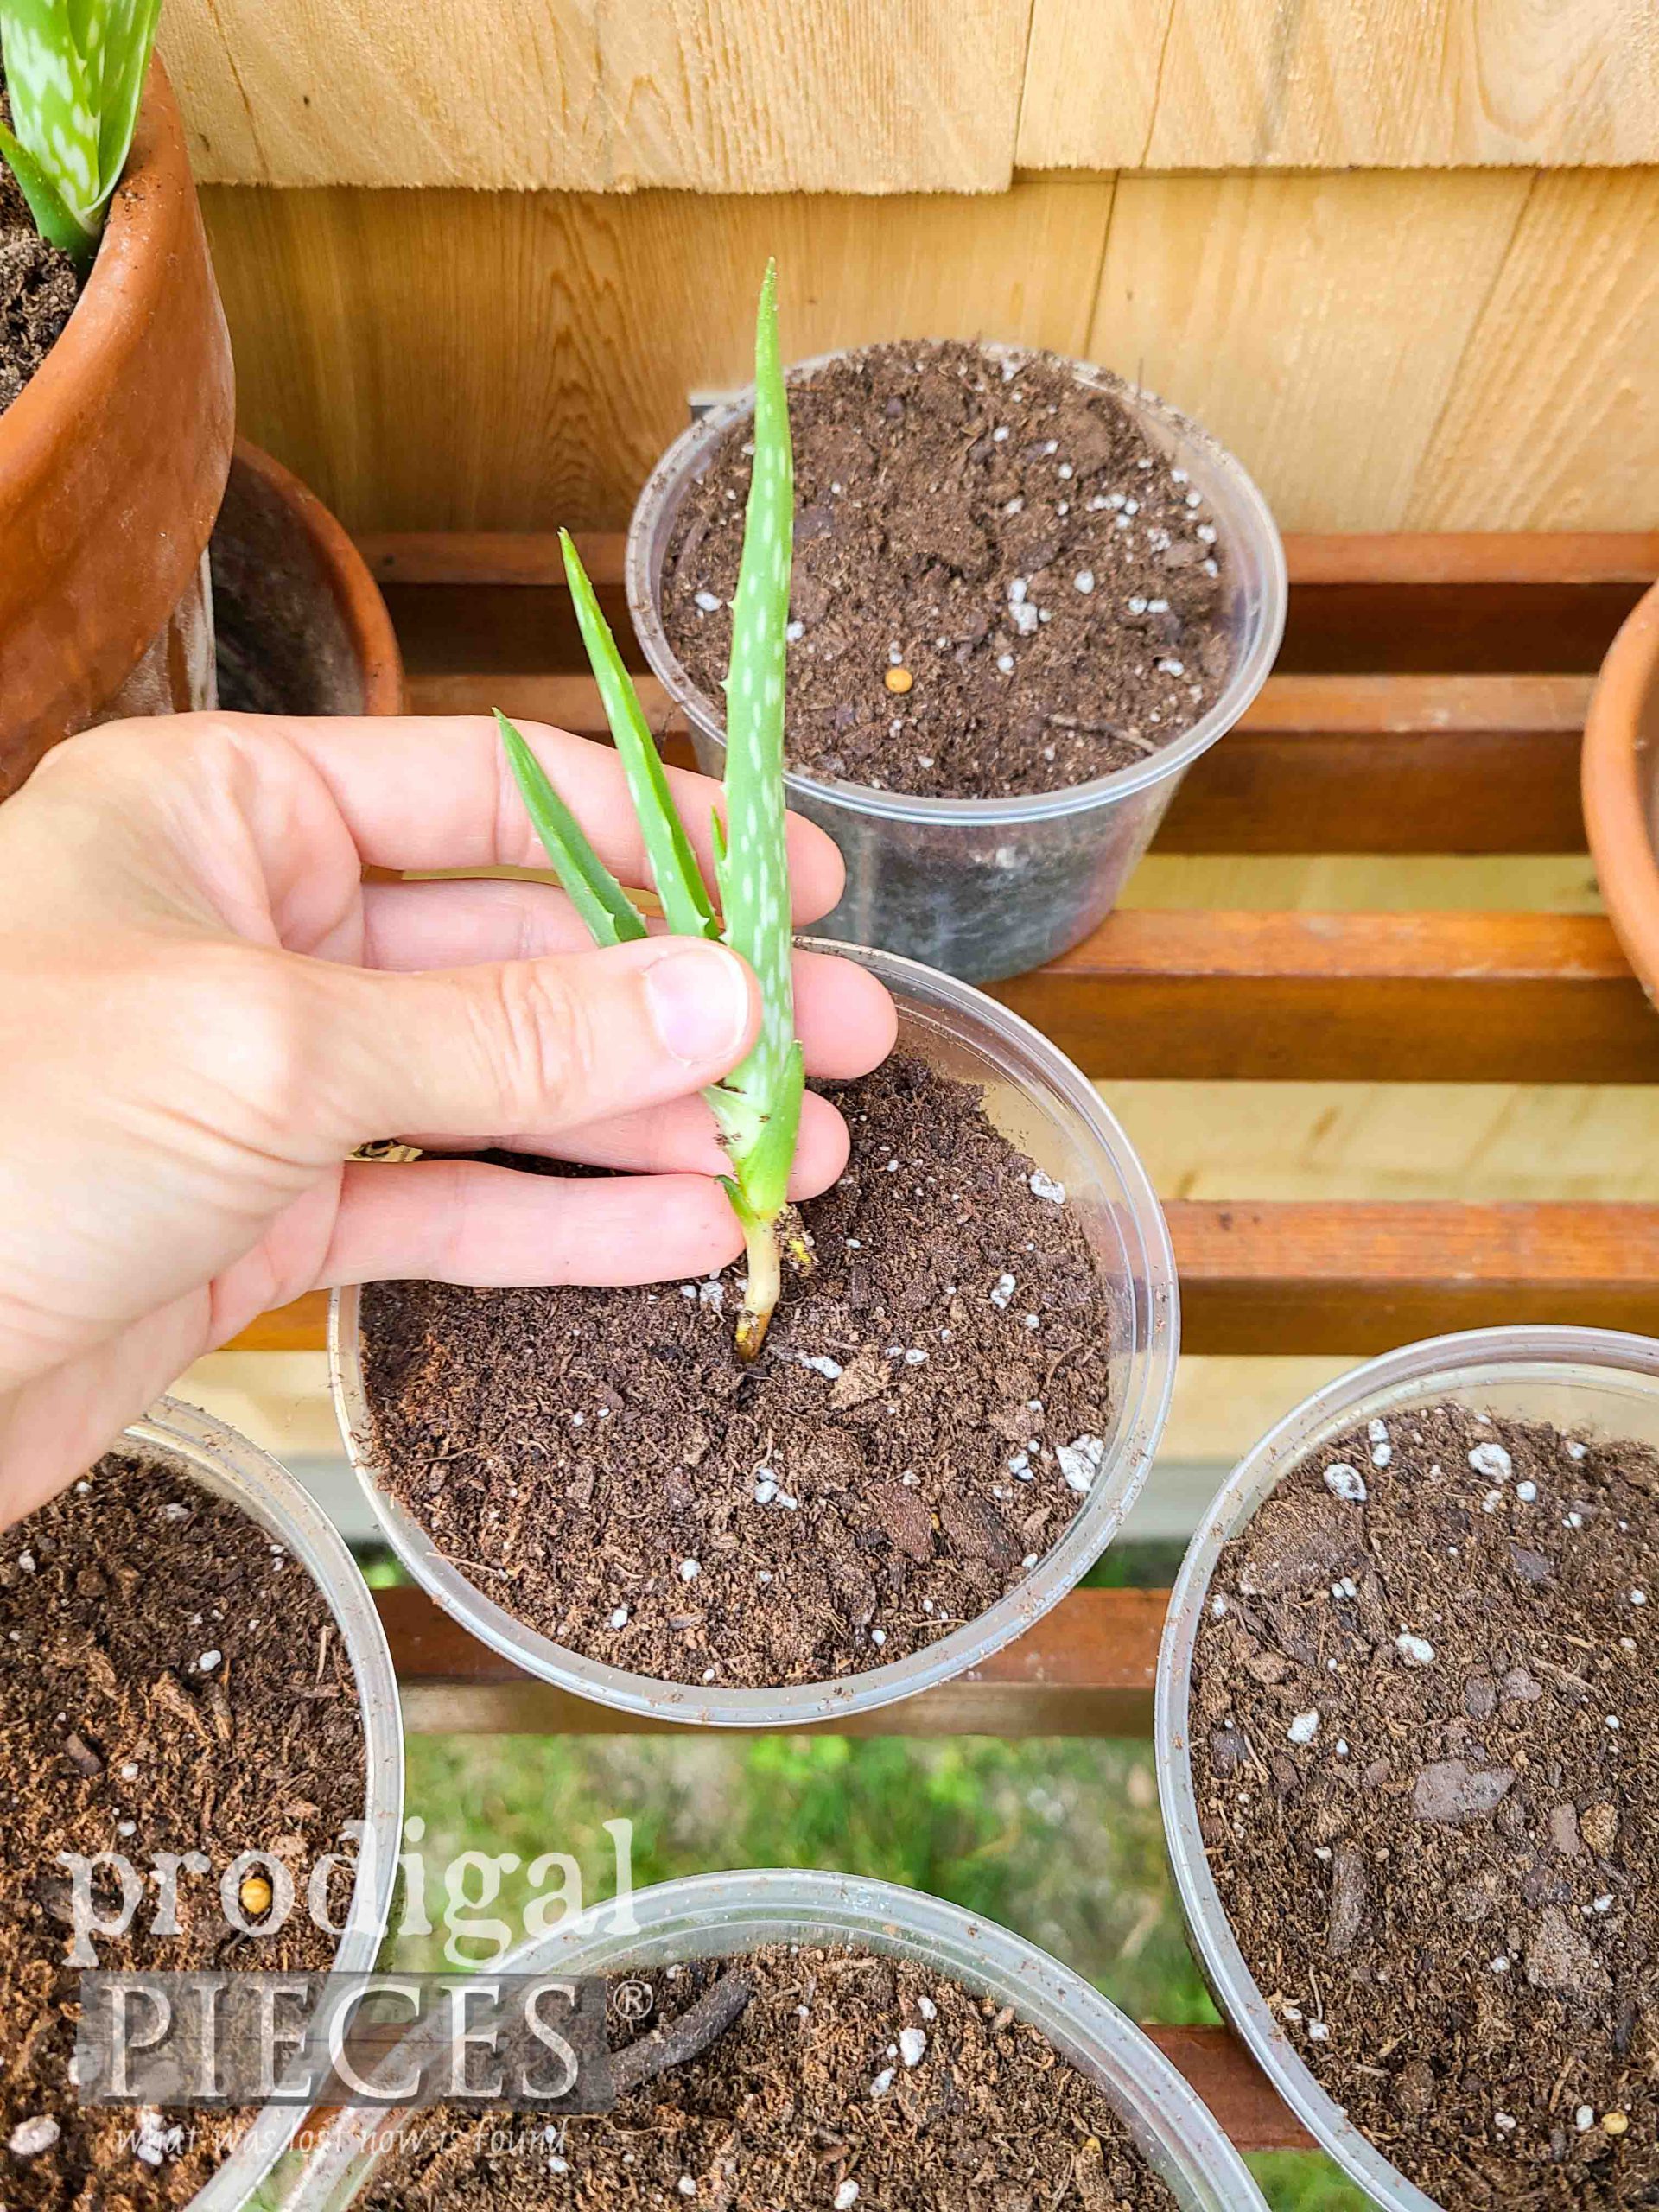 Planting Aloe Start to Share with Neighbors on DIY Folding Potting Bench by Prodigal Pieces | prodigalpieces.com #prodigalpieces #diy #home #gardening #homesteading